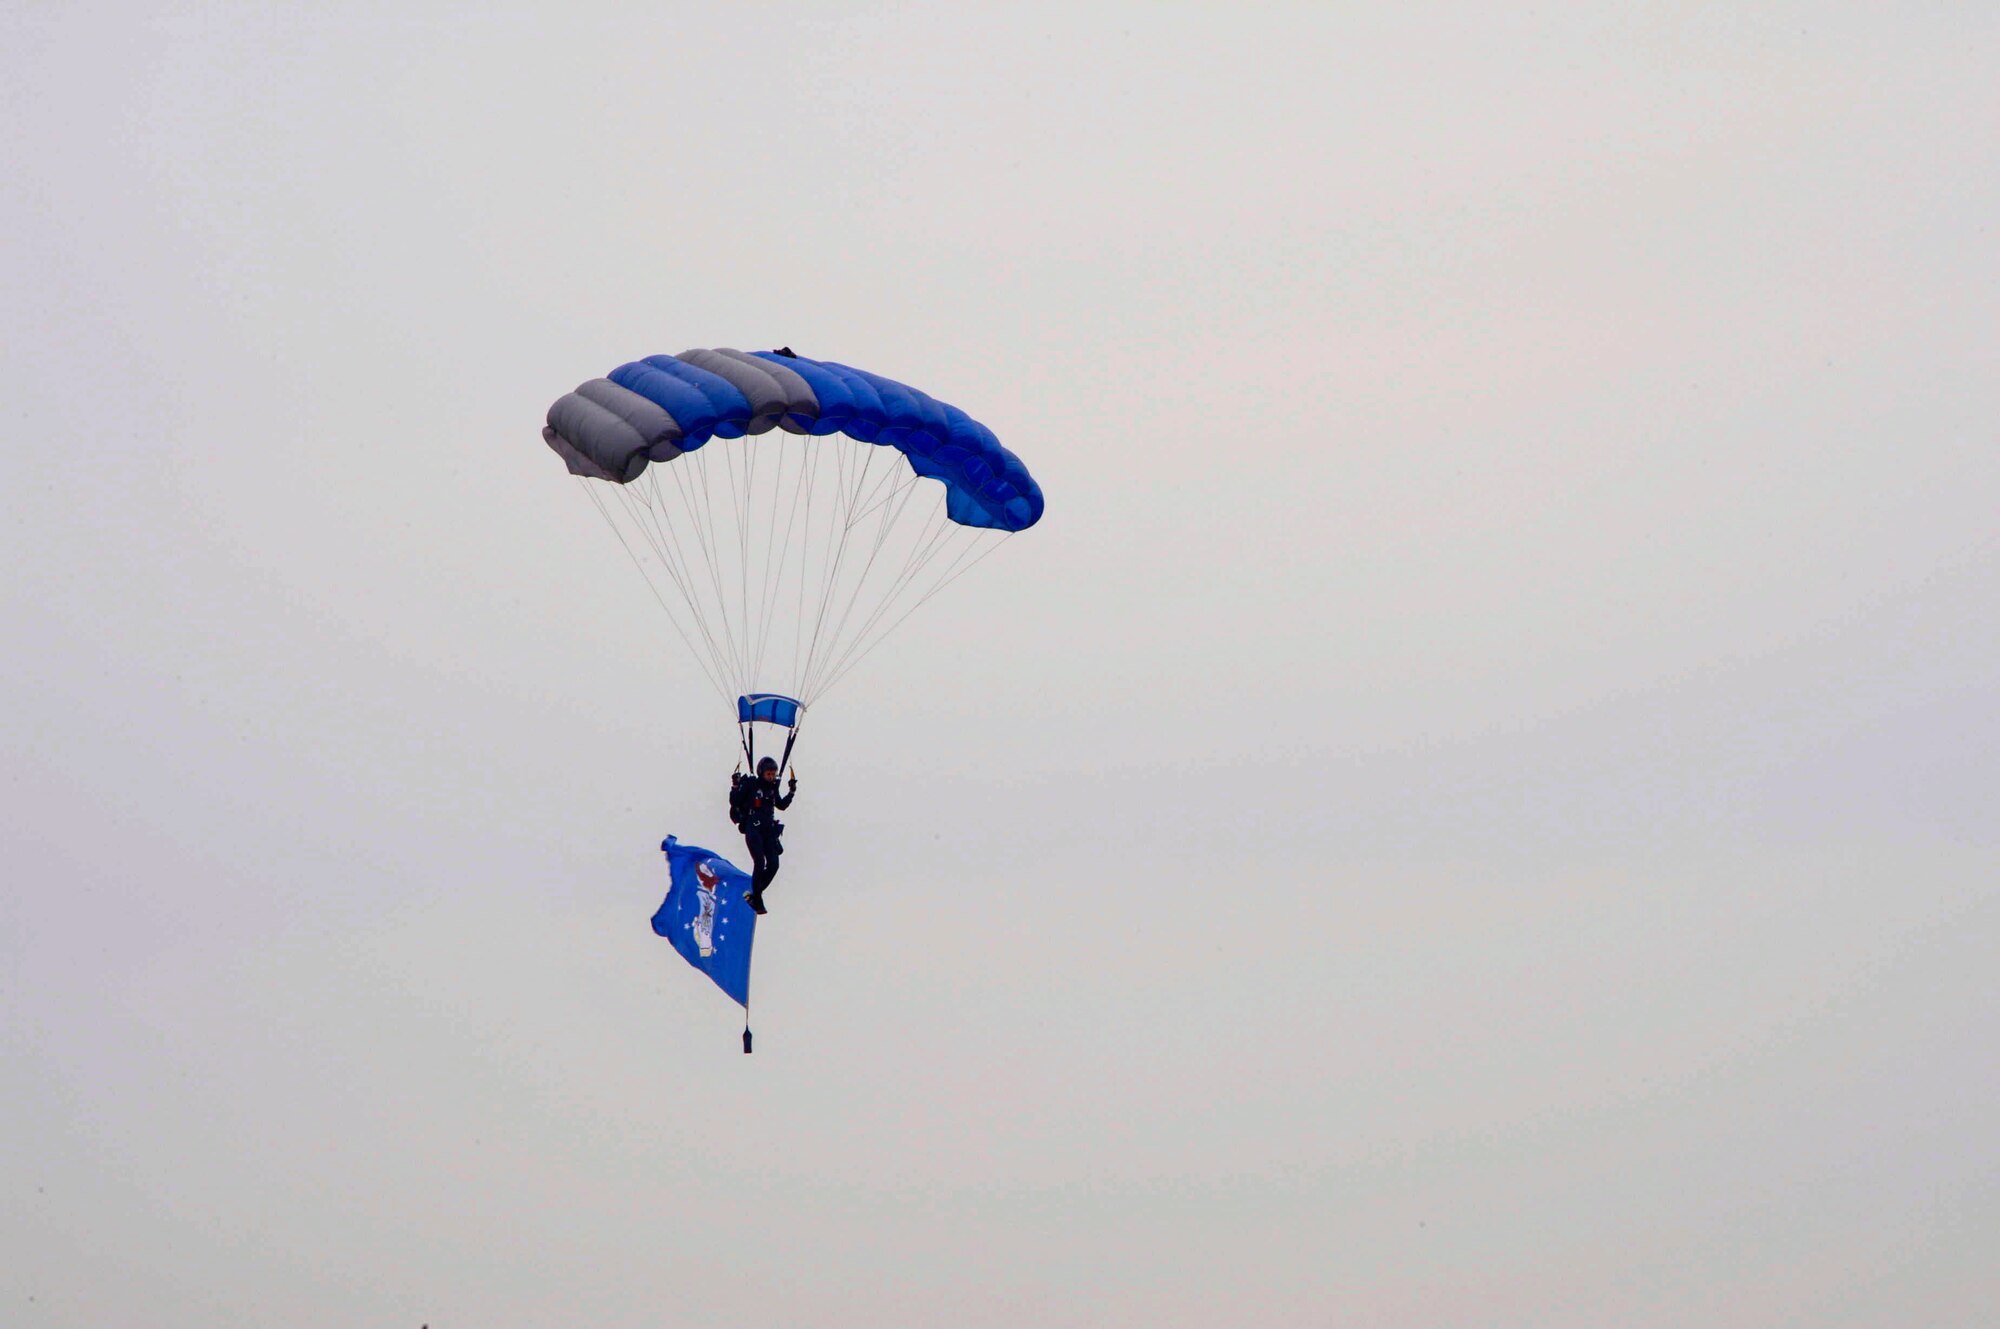 Members from the U.S. Air Force skydiving team, Wings of Blue, perform over the 2016 International Air and Space Fair (FIDAE) in Santiago, Chile, April 1, 2016. During FIDAE, U.S. Airmen participated in in several subject matter expert exchanges with their Chilean counterparts and also hosted static displays and aerial demonstrations to support the air show.  (U.S. Air Force photo by Tech. Sgt. Heather Redman/Released)